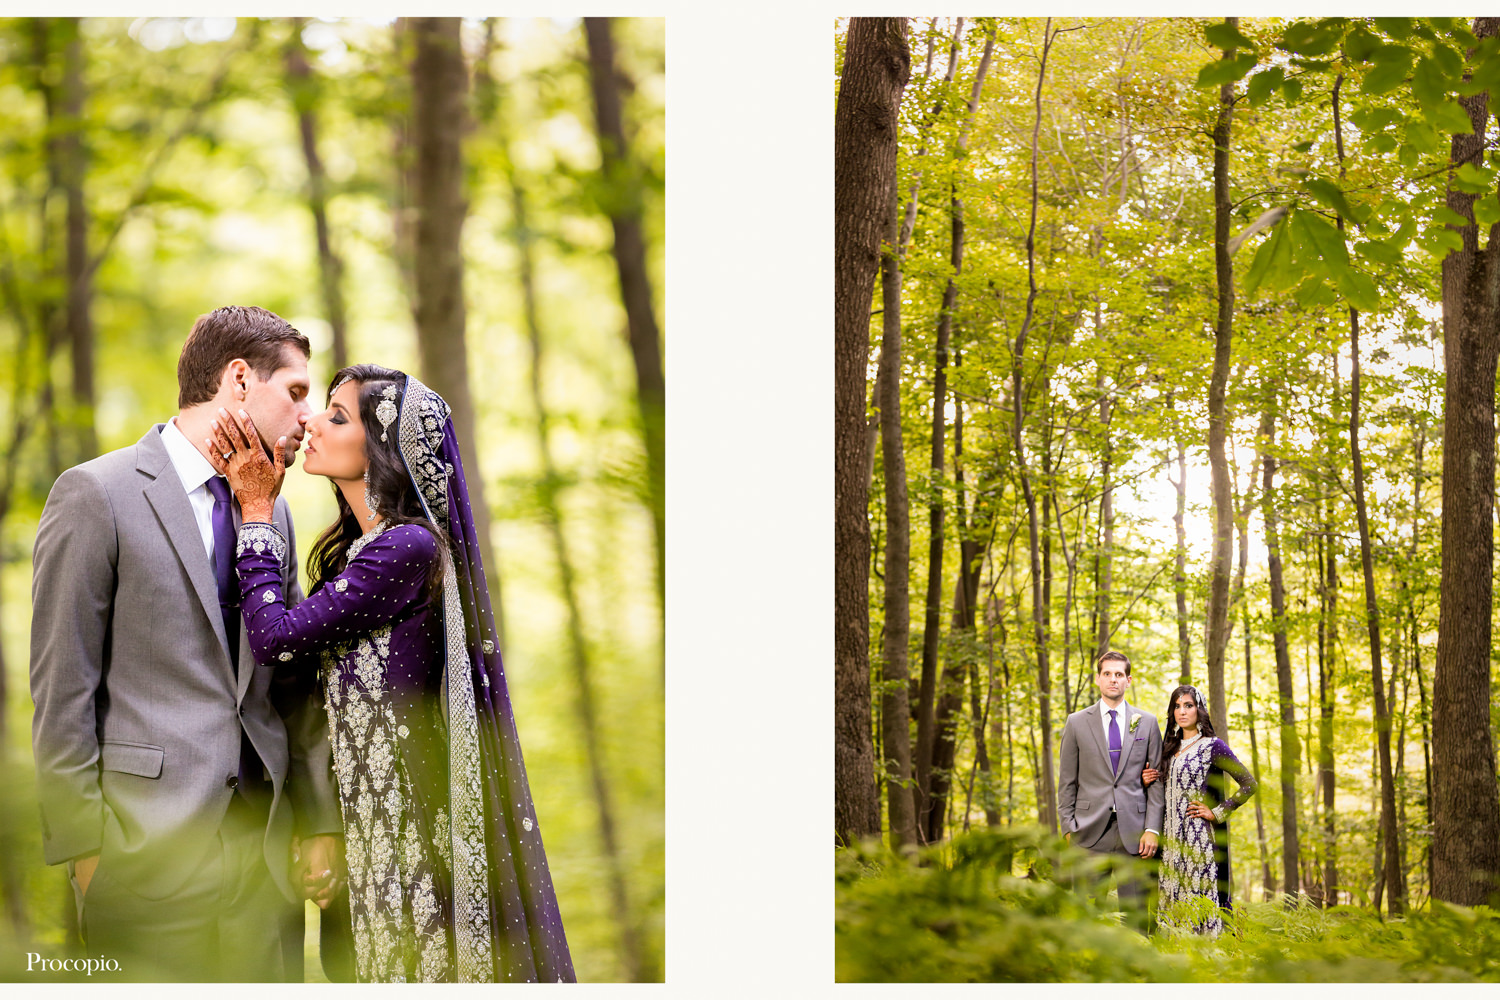 Mountain Memories at Thorpewood, Thurmont, MD, wedding colors are blue purple and white, Indian bride, Jewish groom, this couple is from NYC, Manhattan, New York City, the bride wore an American wedding gown and then changed into a traditional Indian wedding dress for the reception, outdoor ceremony in the pine cathedral, indoor reception, Procopio Photography, best top Washington DC photographer, best top Maryland photographer, best top Virginia photographer, best top DMV photographer, best top wedding photographer, best top commercial photographer, best top portrait photographer, best top boudoir photographer, modern fine art portraits, dramatic, unique, different, bold, editorial, photojournalism, award winning photographer, published photographer, memorable images, be different, stand out